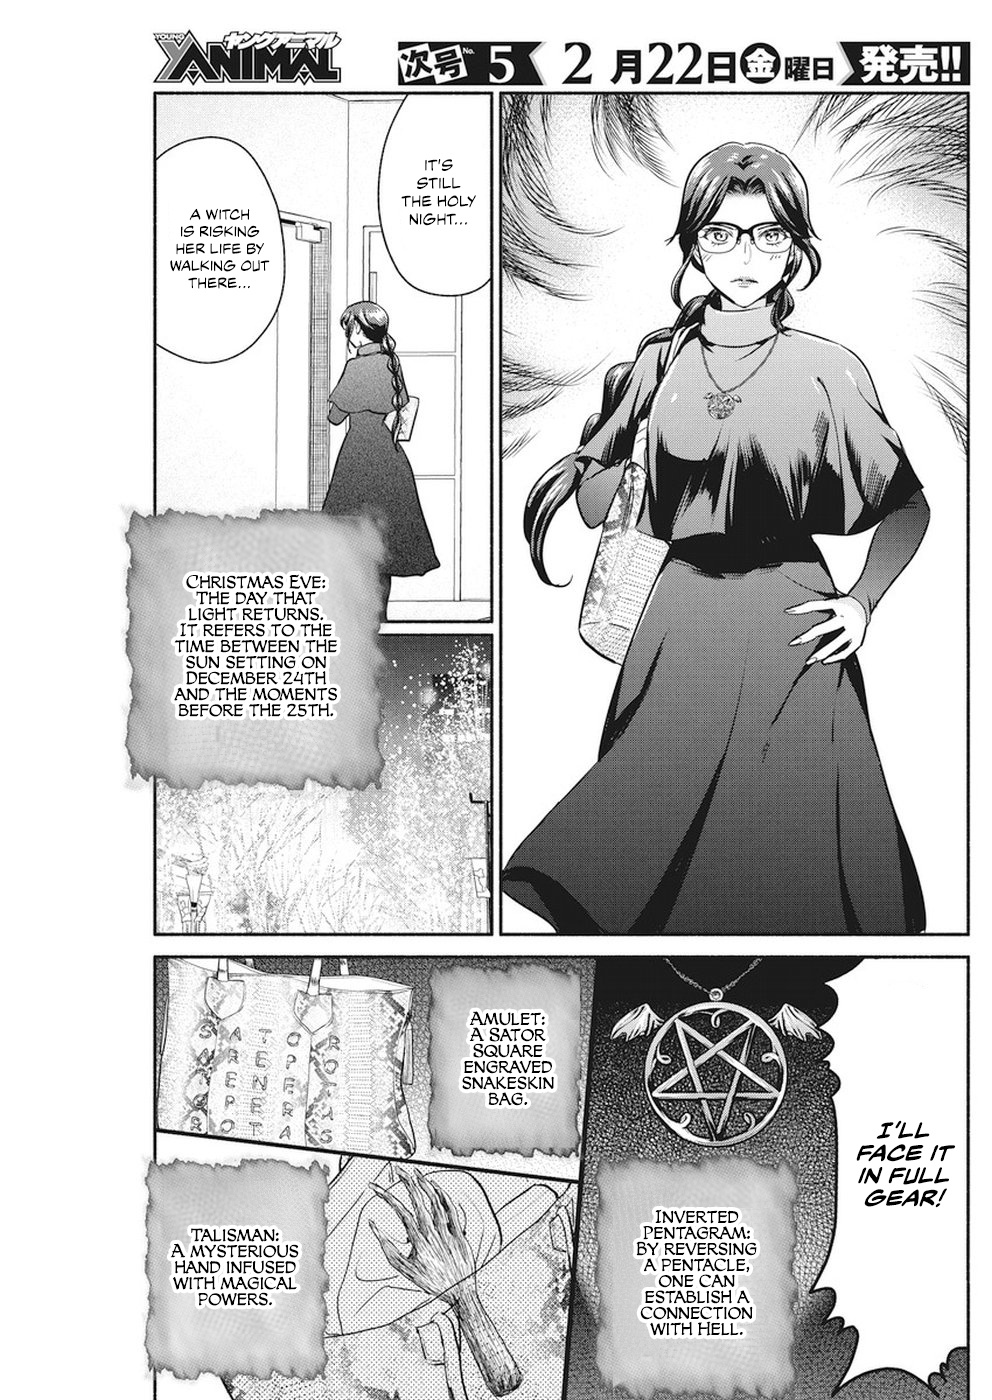 The Life Of The Witch Who Remains Single For About 300 Years! Chapter 21 #6